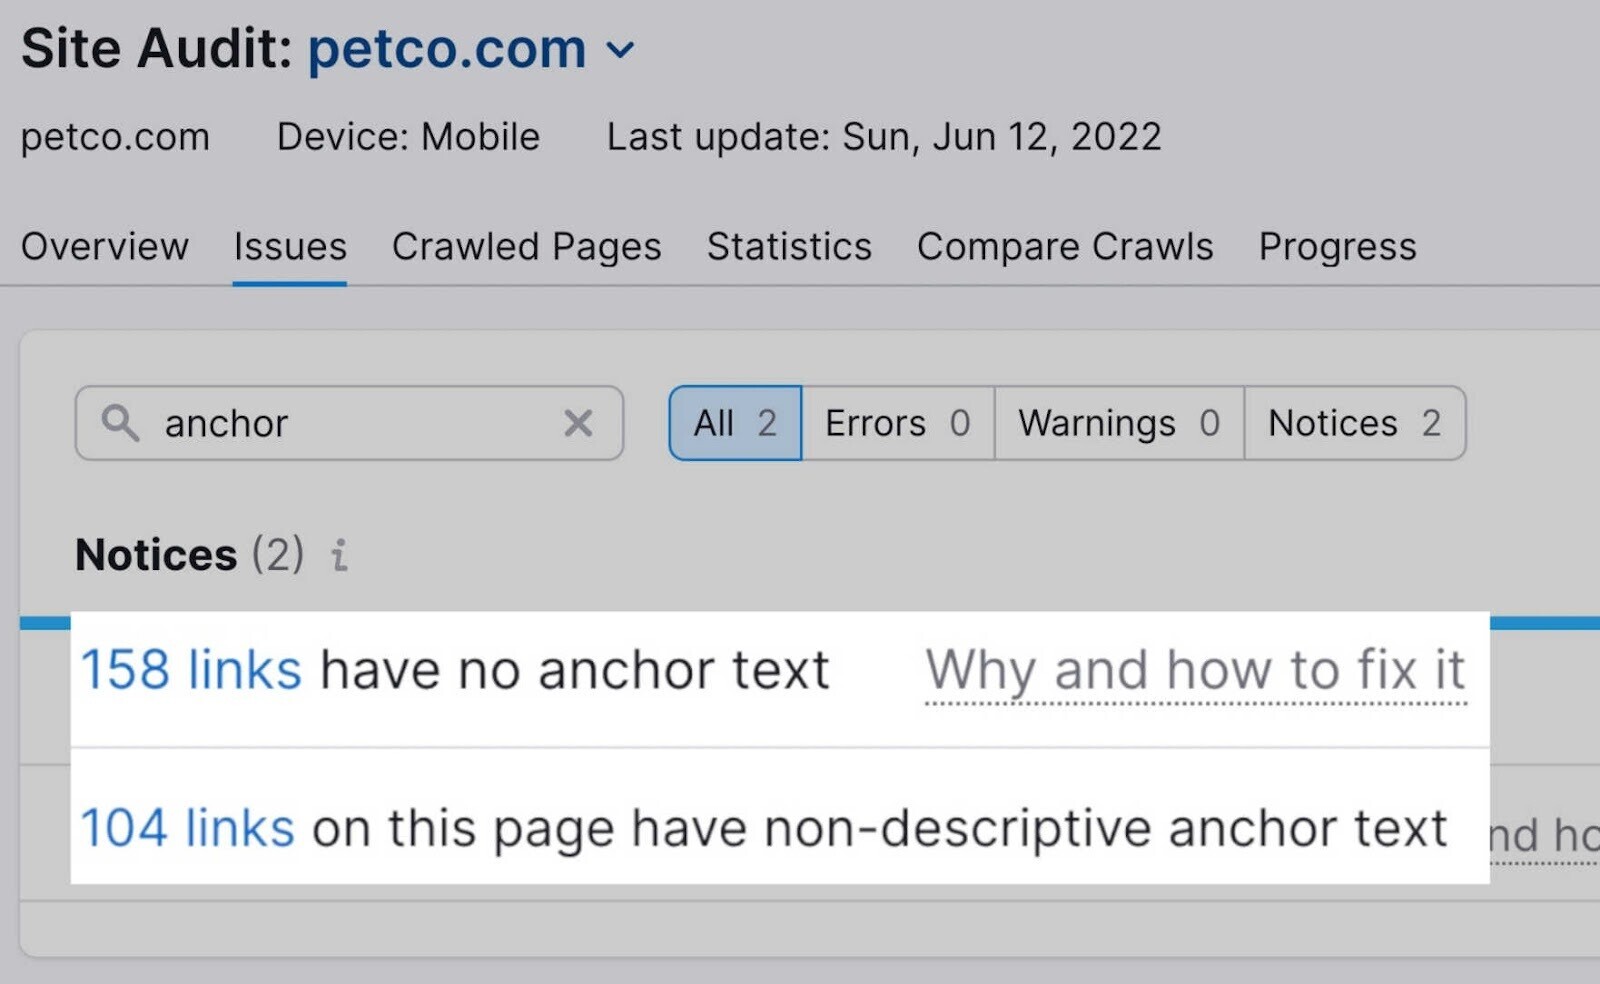 Anchor text notices in Site Audit